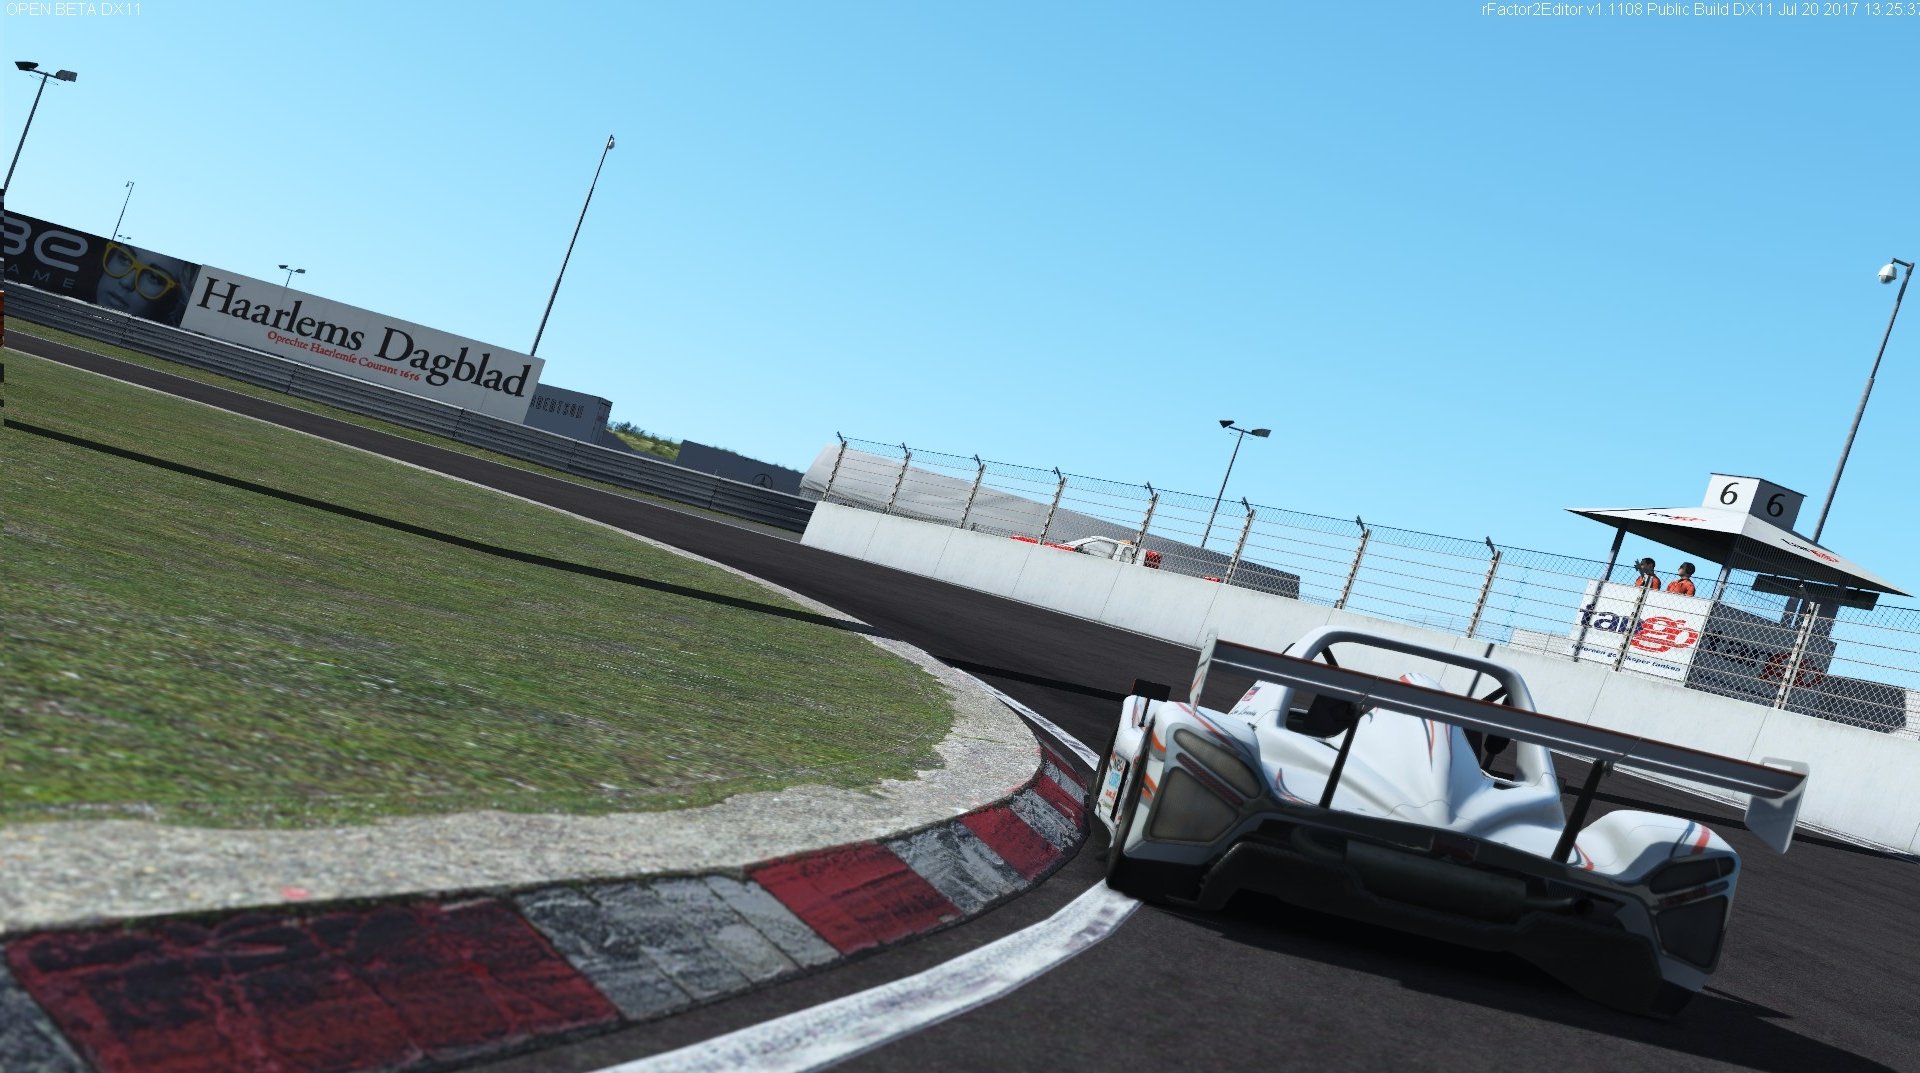 More information about "rFactor 2: roadmap update Luglio 2017"